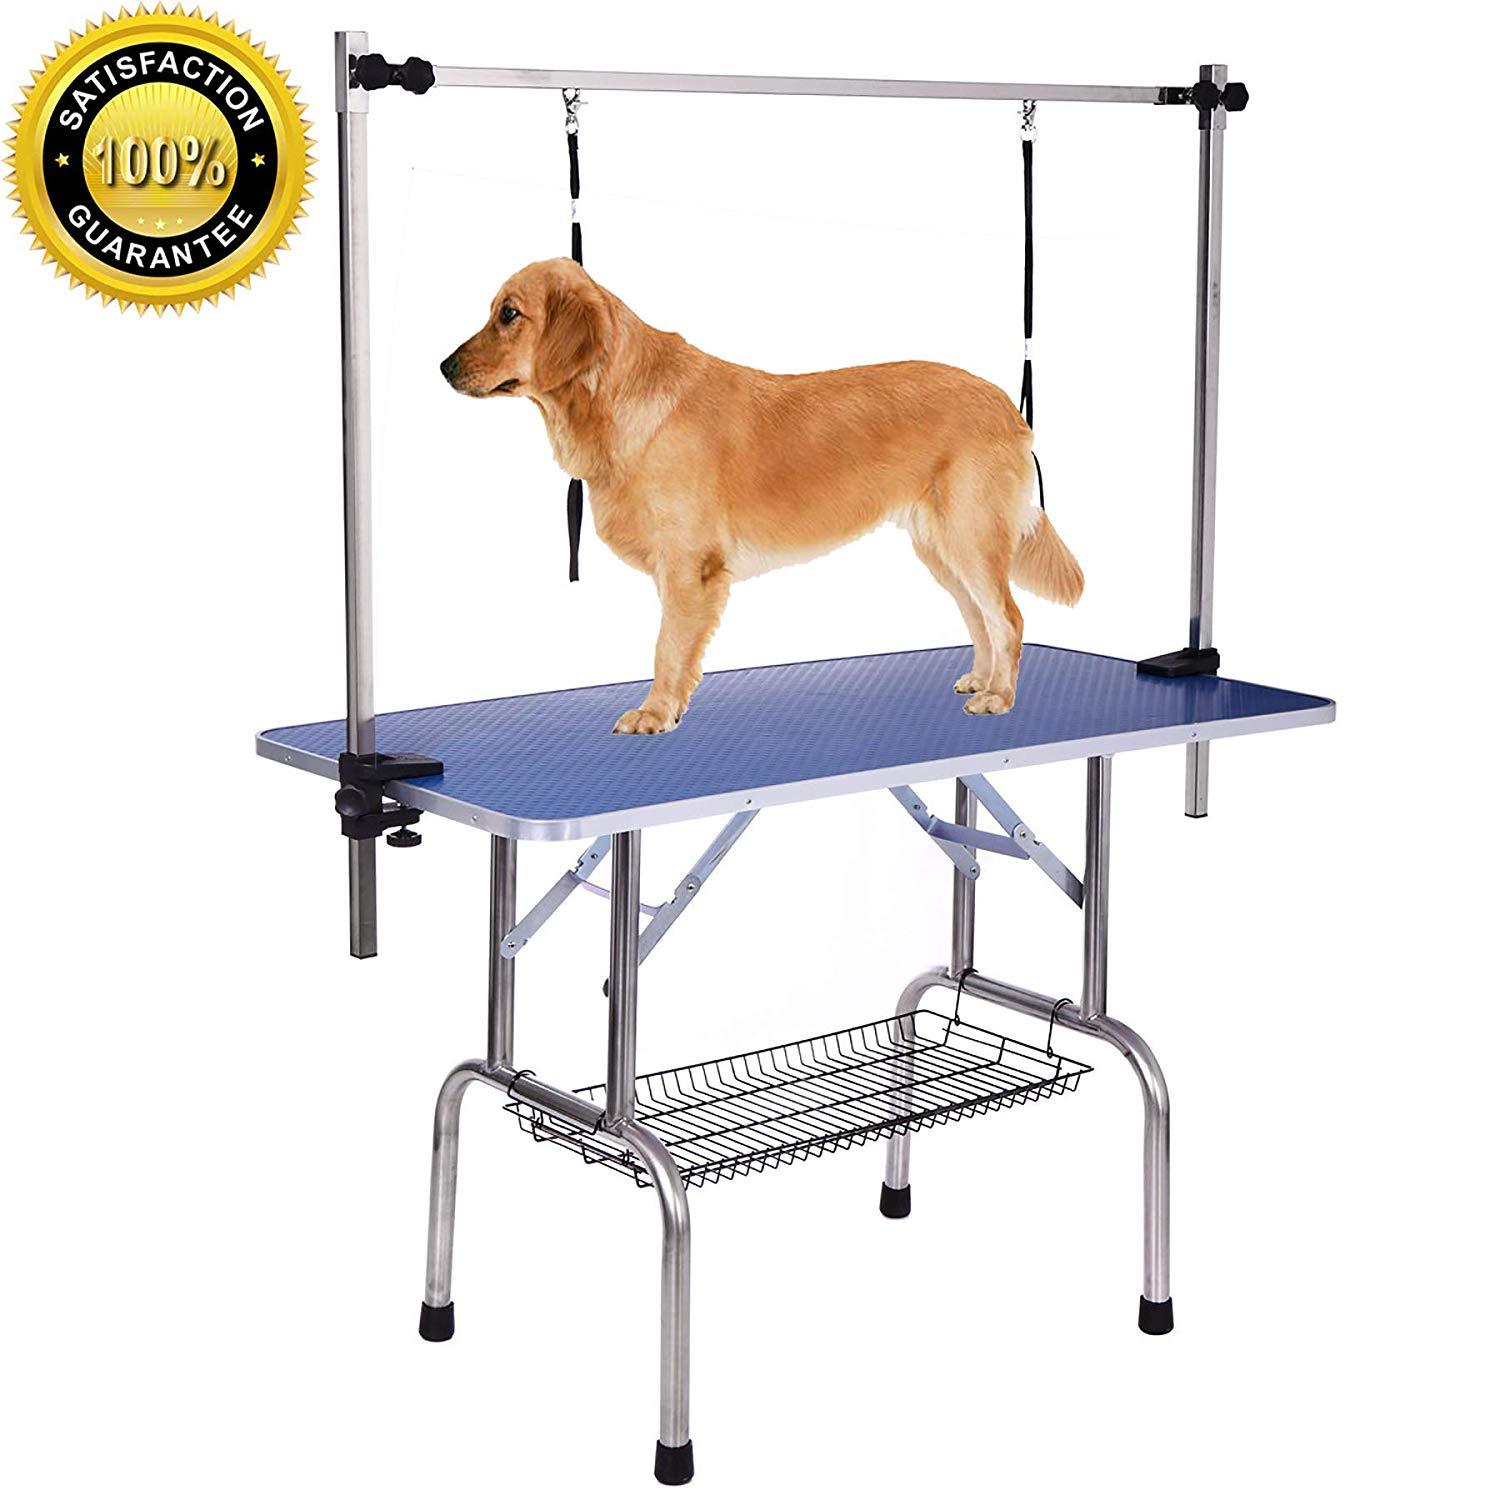 HIGH QUALITY FOLDING PET GROOMING TABLE STAINLESS LEGS blue-wood + stainless steel